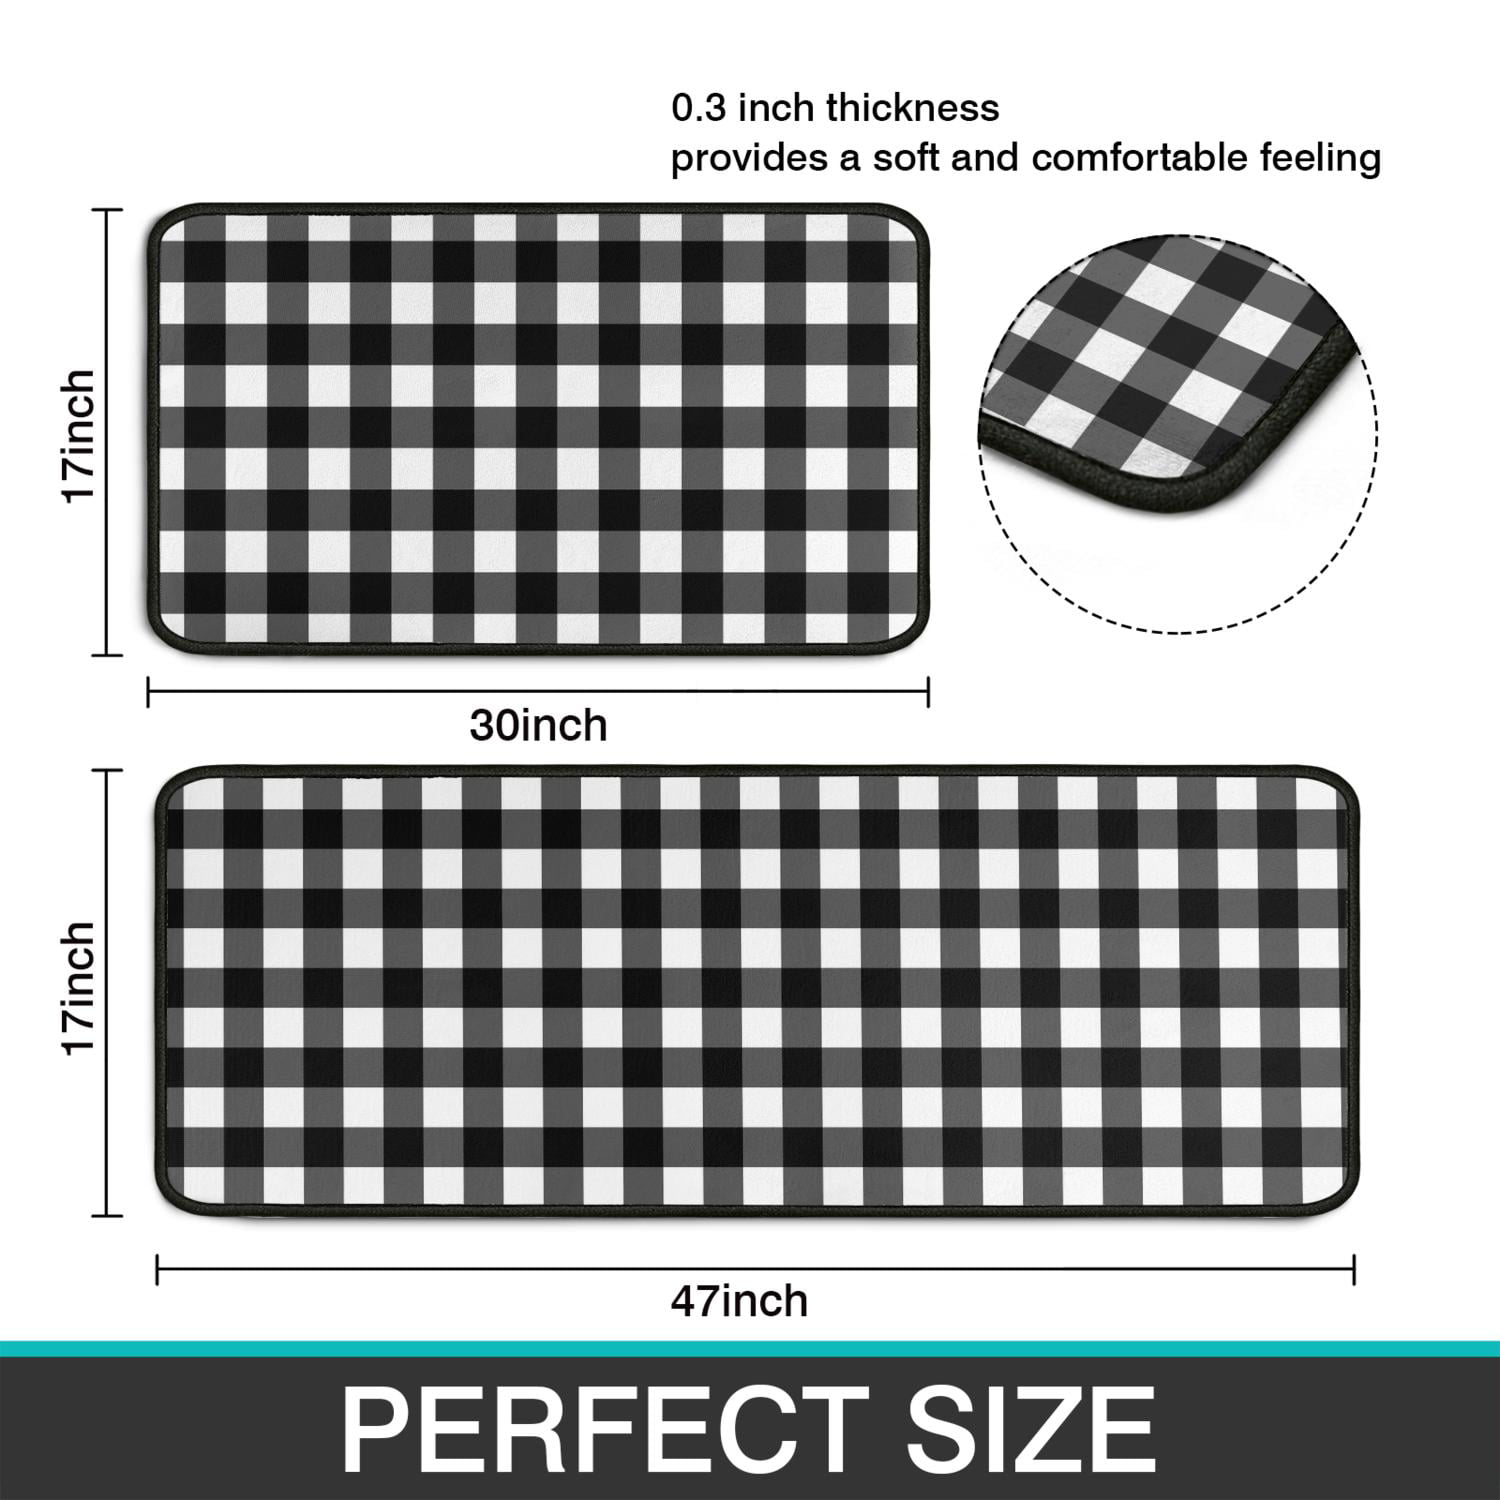 Buffalo Plaid Kitchen Rugs Rustic Decor Cow Set of 2, Black and White  Washable Runner Rug Decoration Farmhouse Kitchen Mat 17x 47+17x 23 